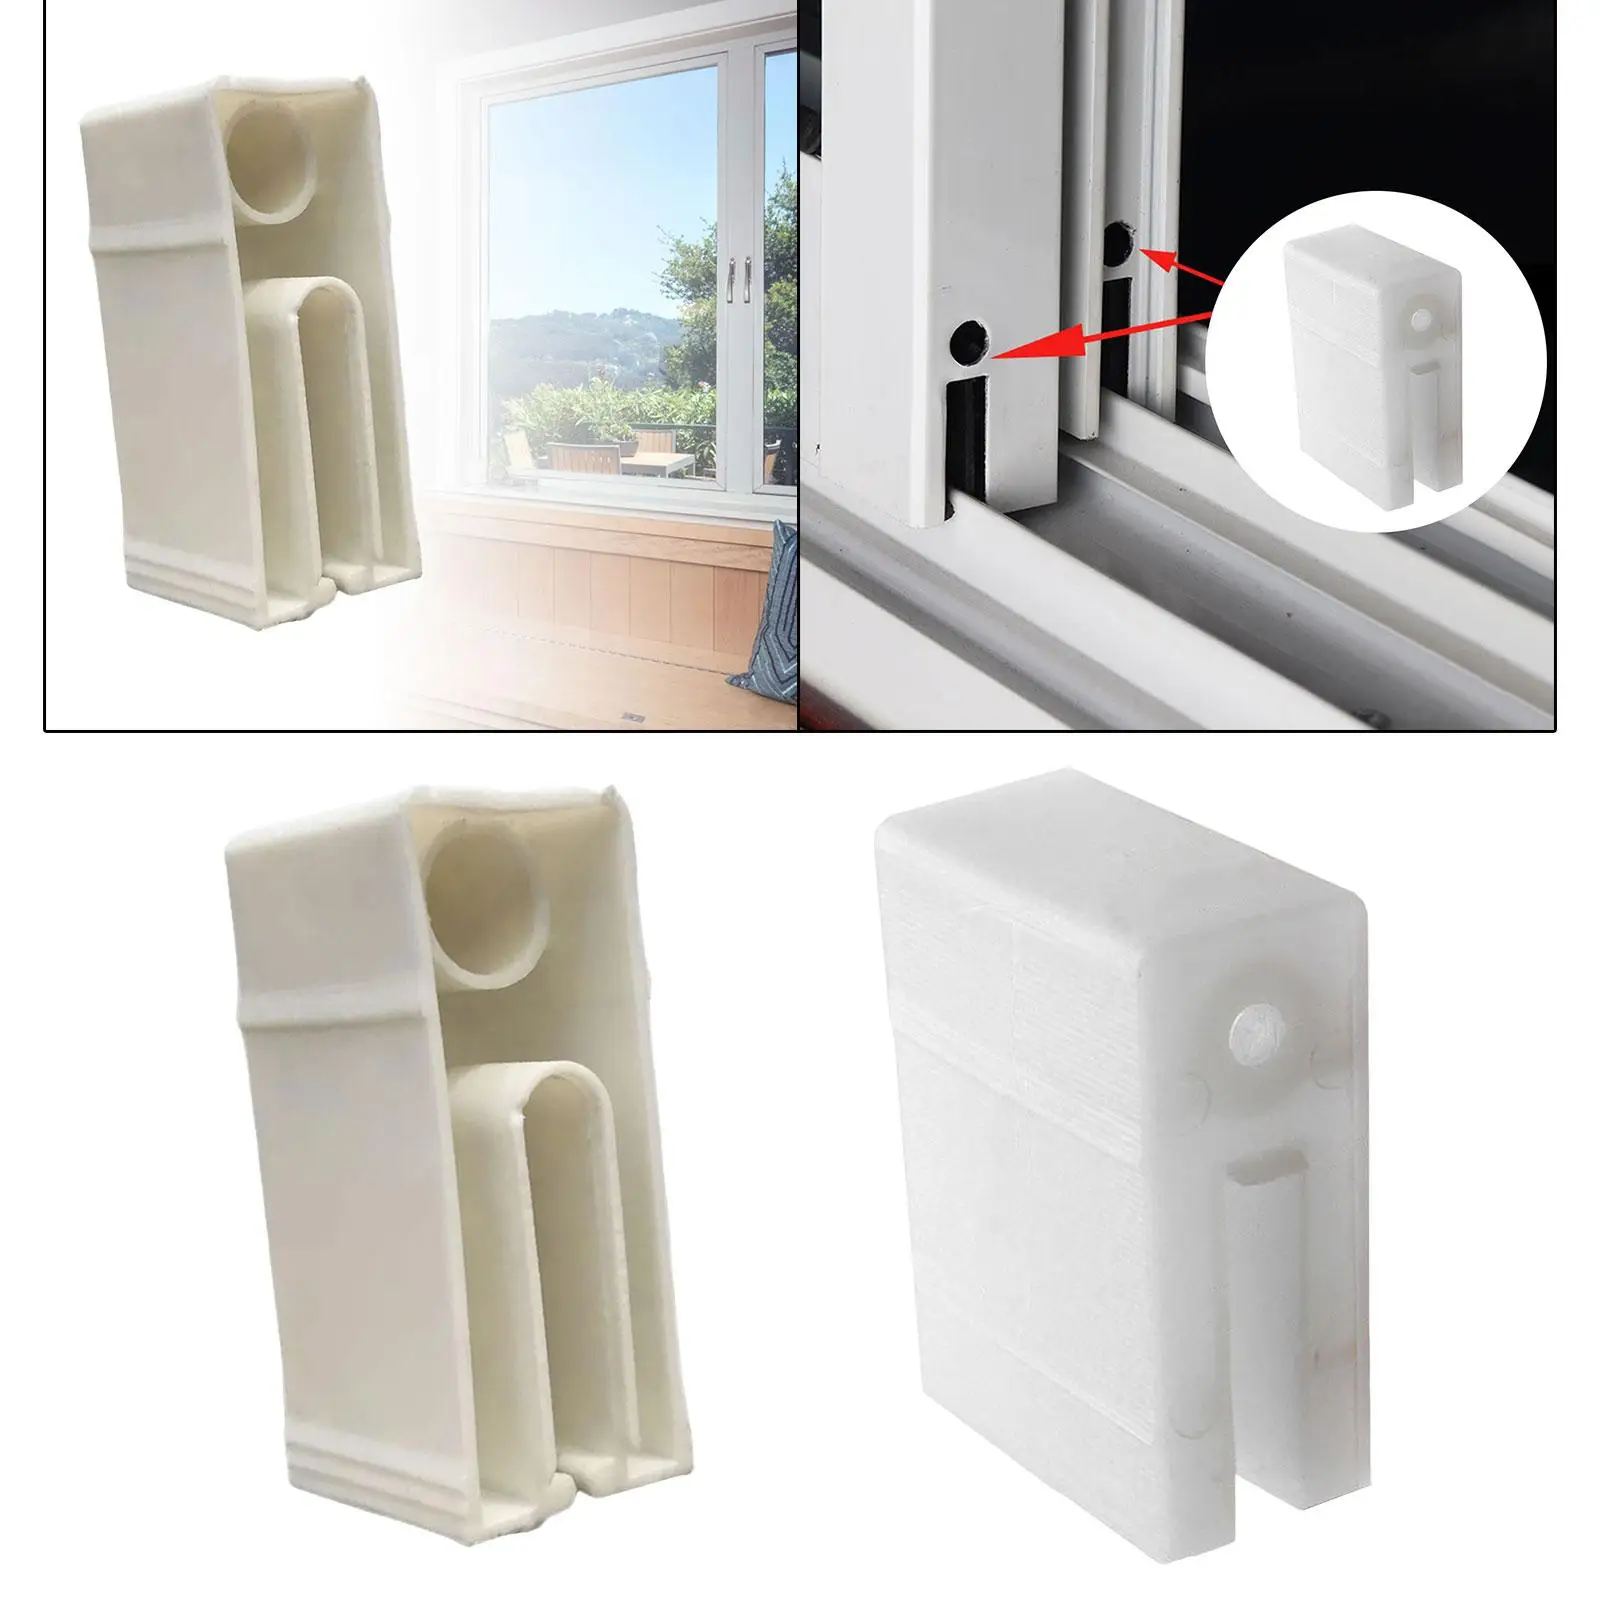 Sliding Window and Door Blocks Replacement Part Easy to Install Window Accessory